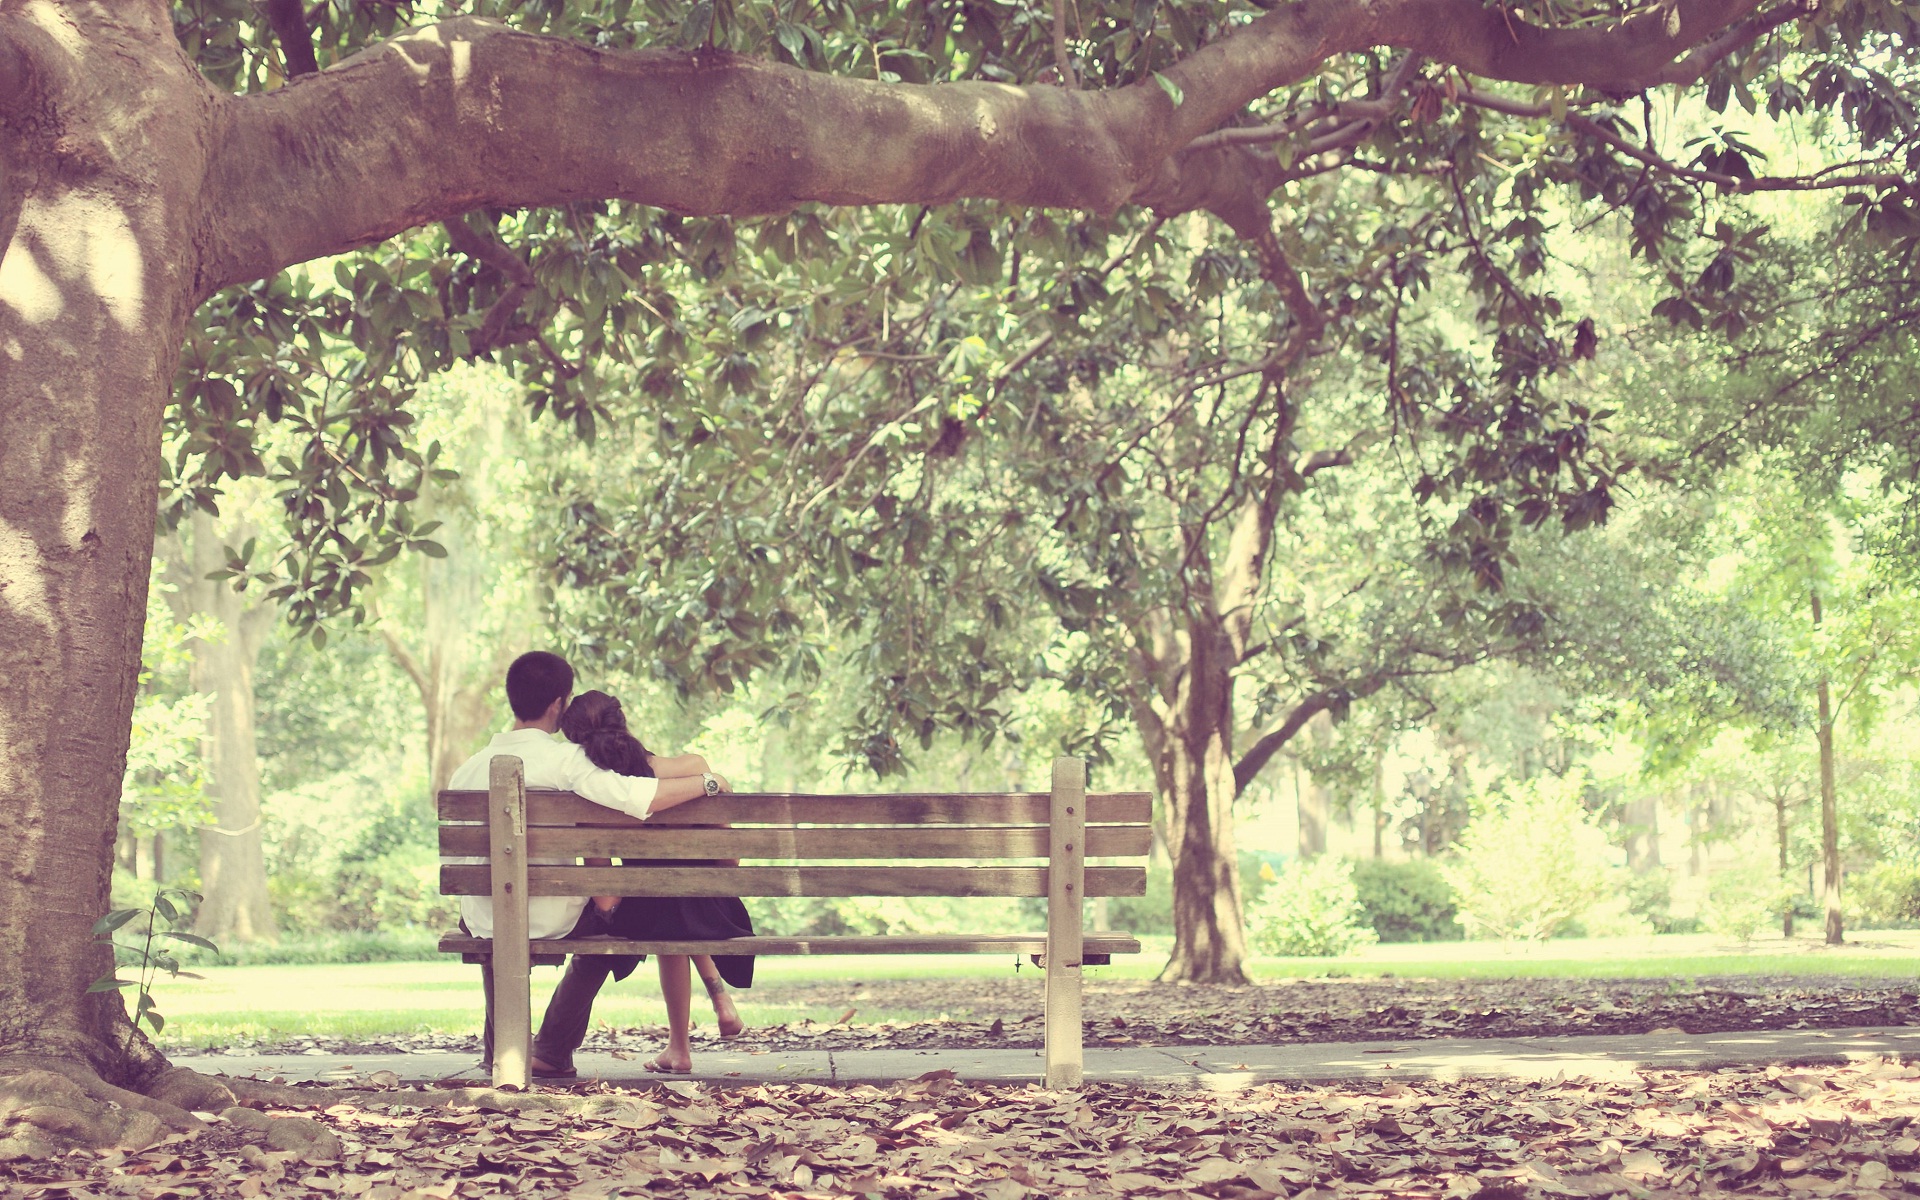 romance-of-new-couple-on-bench-in-garden | HD Wallpapers Rocks